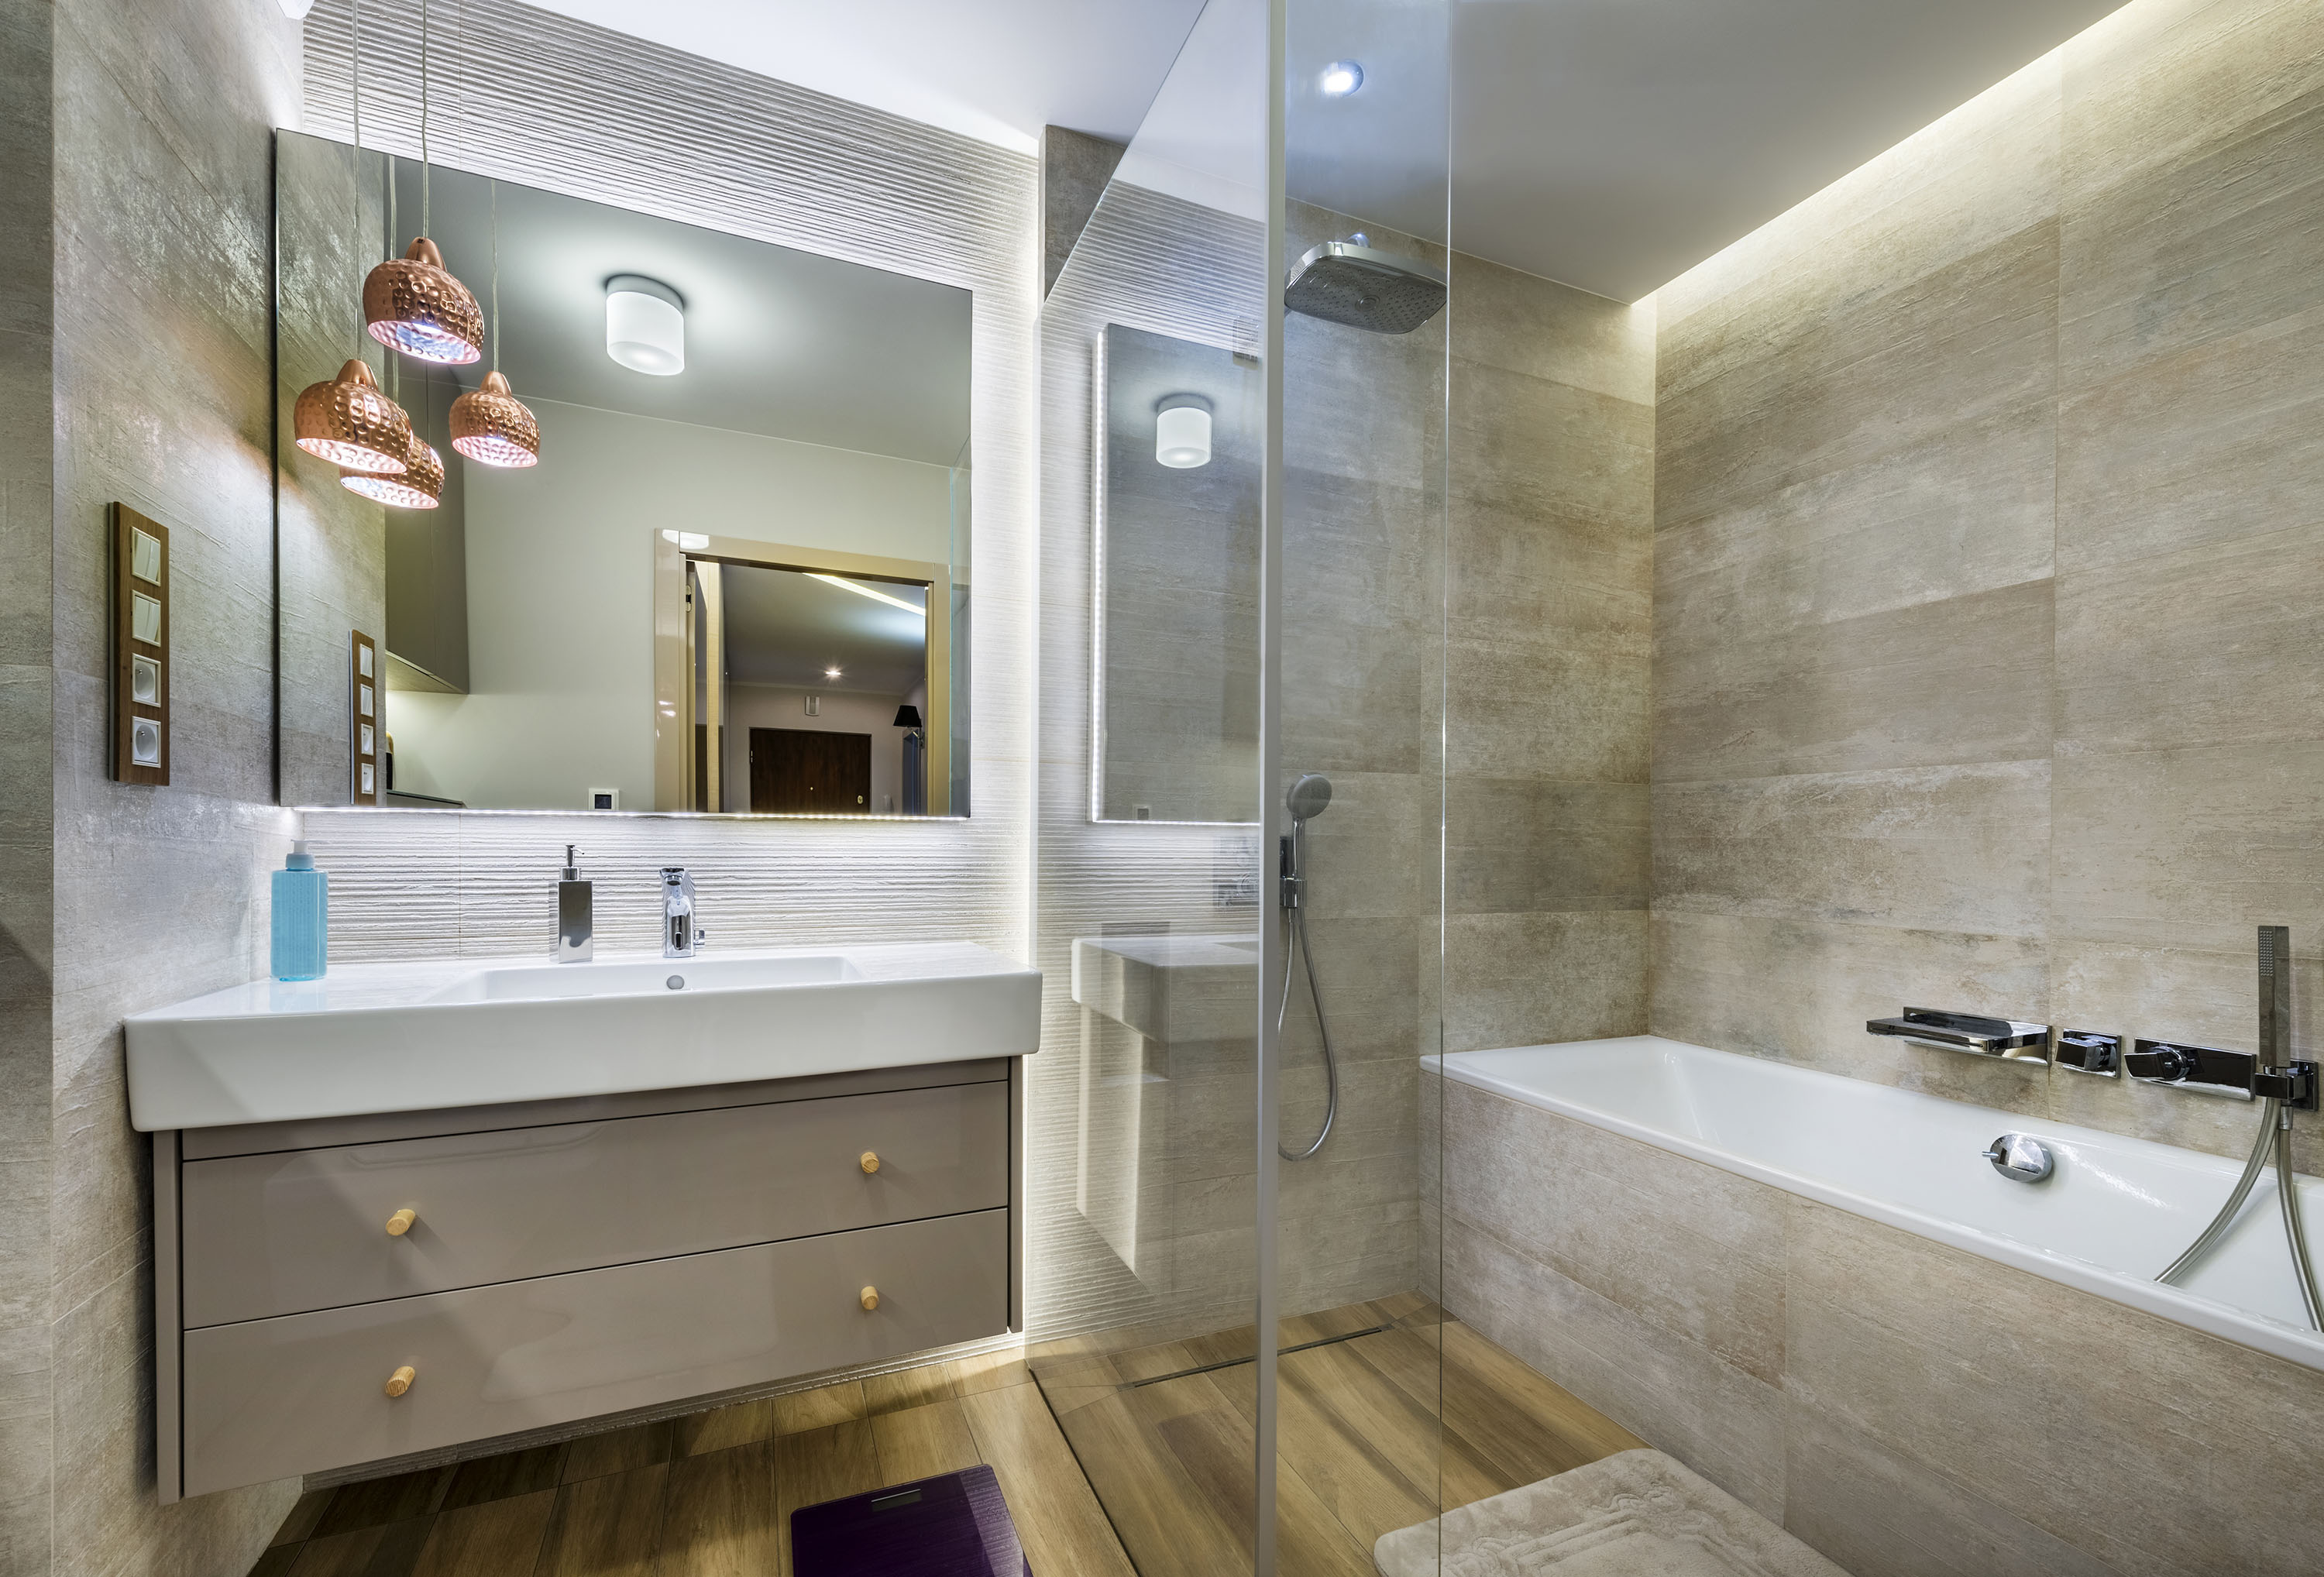 Bathroom Lighting Zones How To Design A Safe And Well Lit Bathroom Space Real Homes